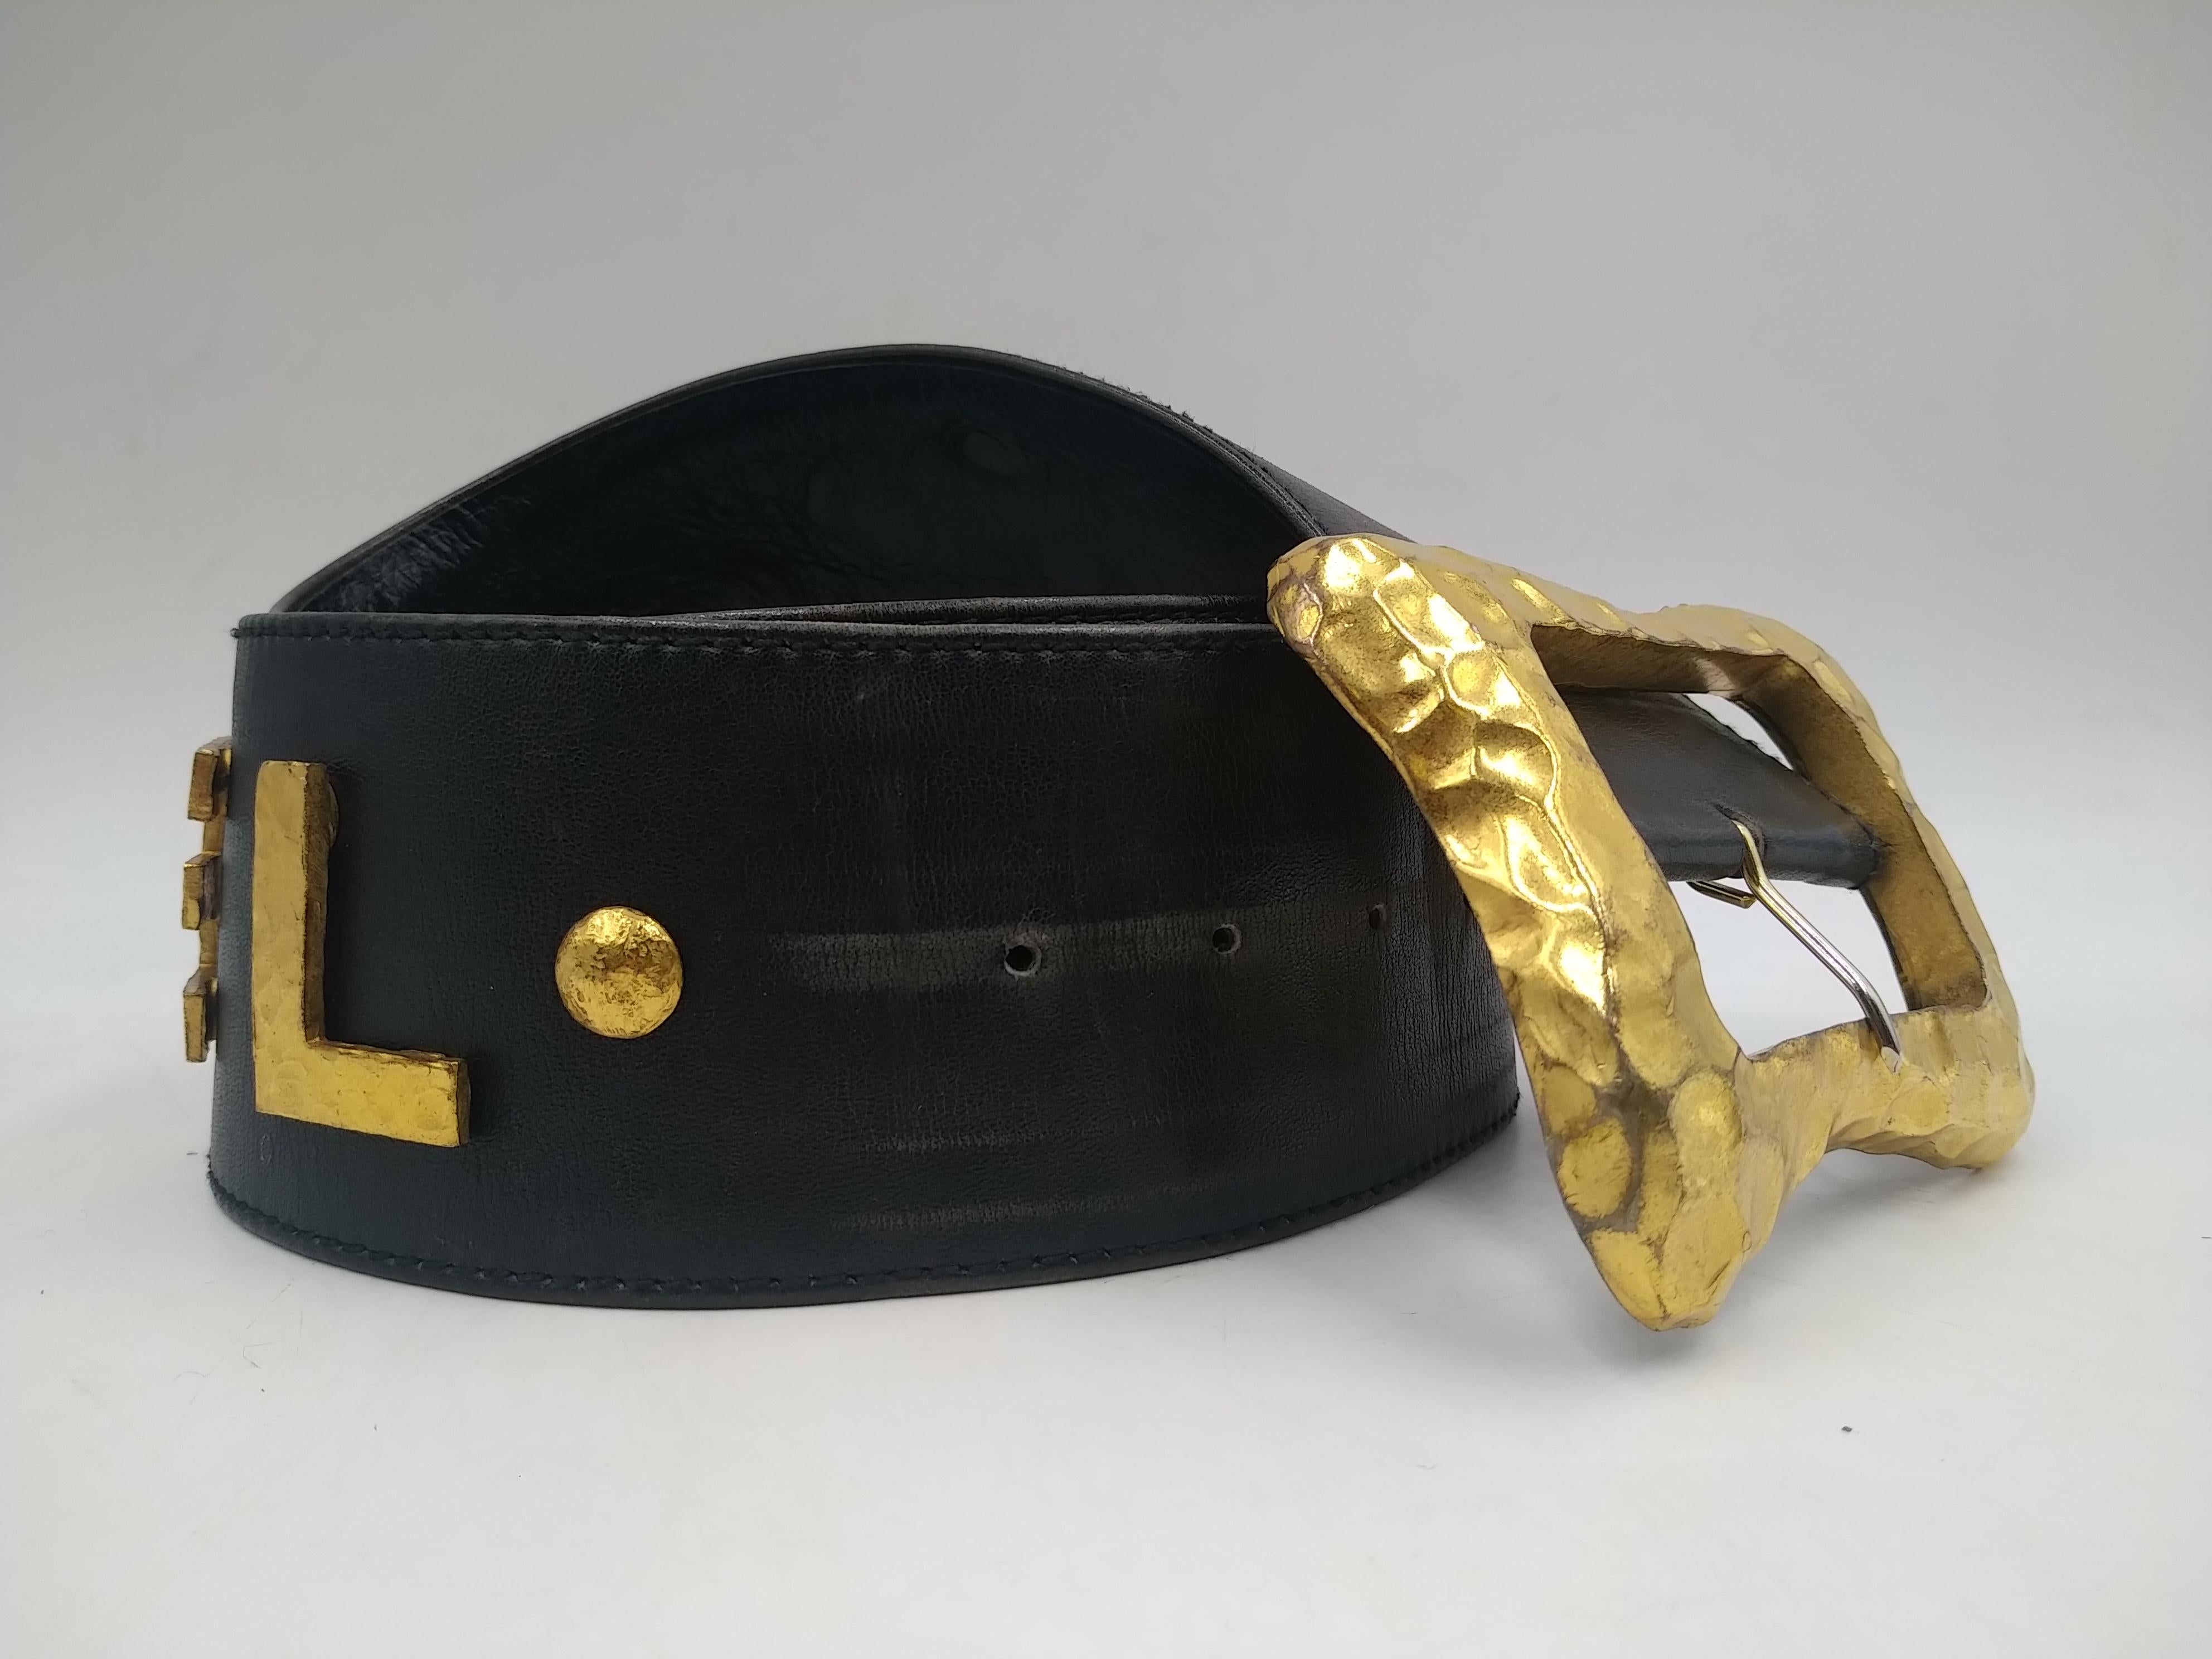 Chanel black leather belt Gold Iconic written Chanel, Runway spring/summer 1993
- 100% authentic chanel
- Black leather belt with large gold-colored Chanel lettering
- Signed CHANEL 93 CC P Made in France, SIZE 80/32